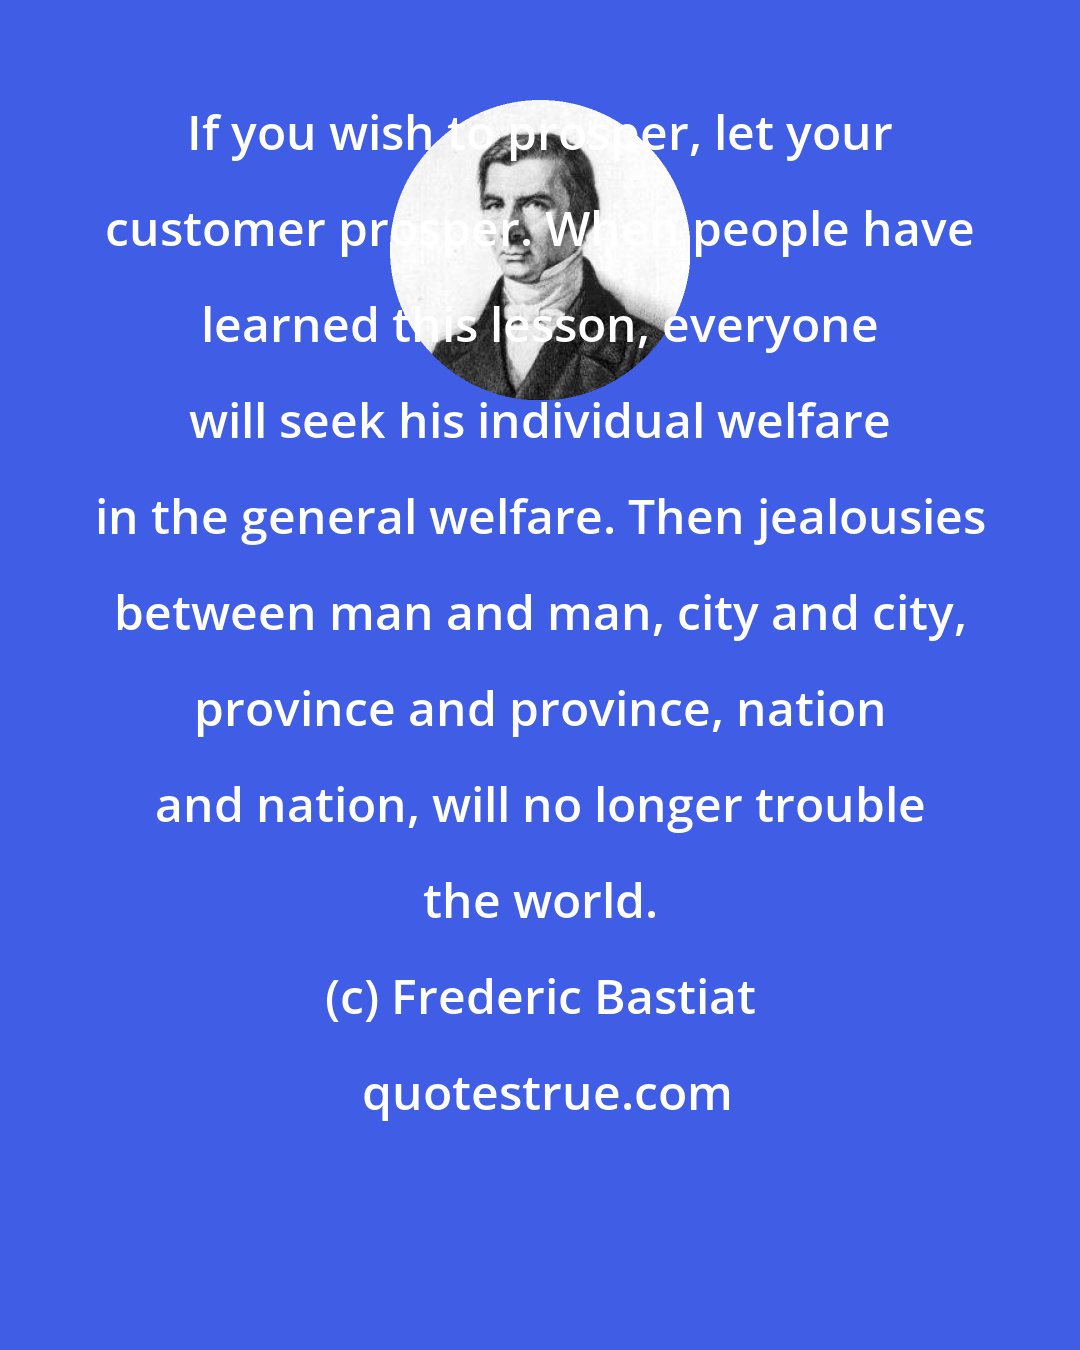 Frederic Bastiat: If you wish to prosper, let your customer prosper. When people have learned this lesson, everyone will seek his individual welfare in the general welfare. Then jealousies between man and man, city and city, province and province, nation and nation, will no longer trouble the world.